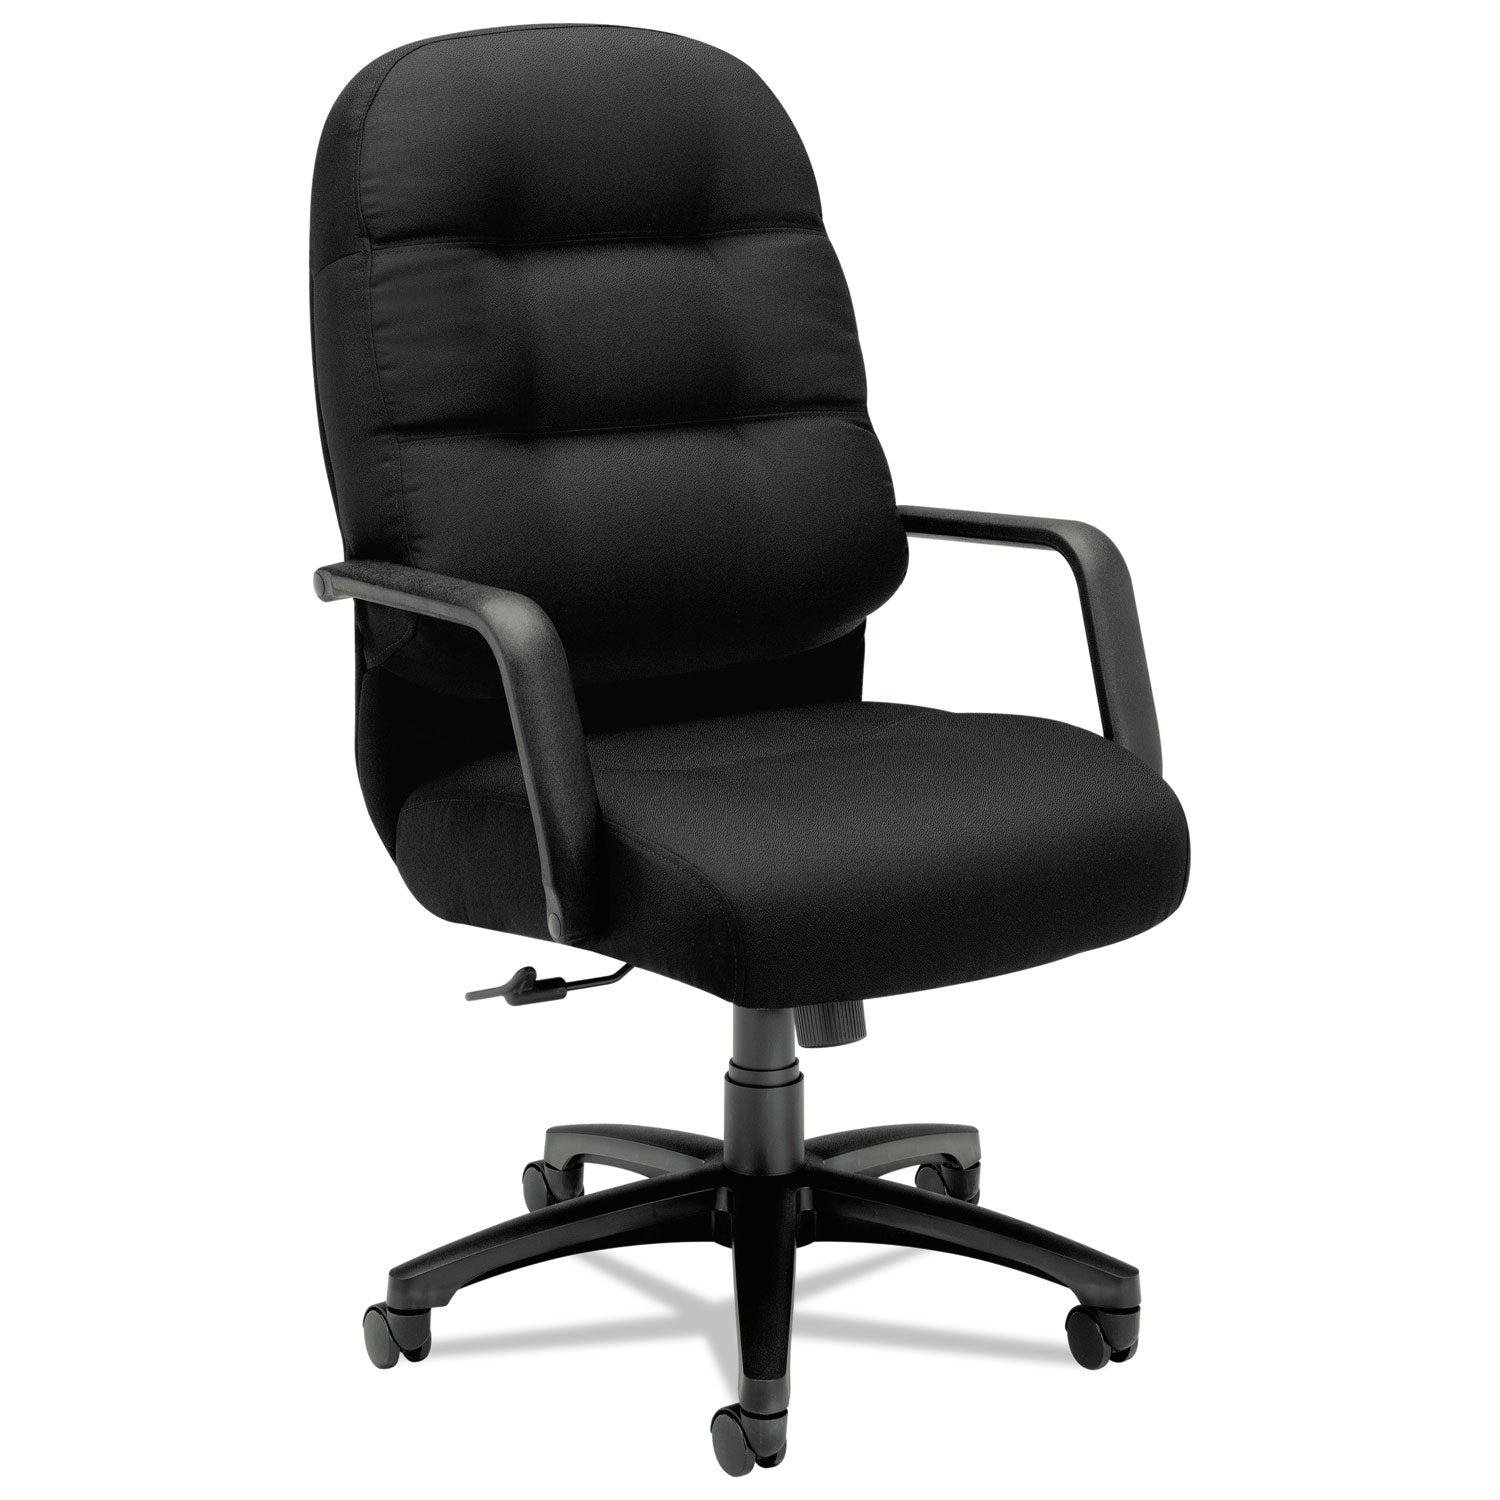 Pillow-Soft 2090 Series Executive High-Back Swivel/Tilt Chair, Supports Up to 300 lb, 17" to 21" Seat Height, Black - 1